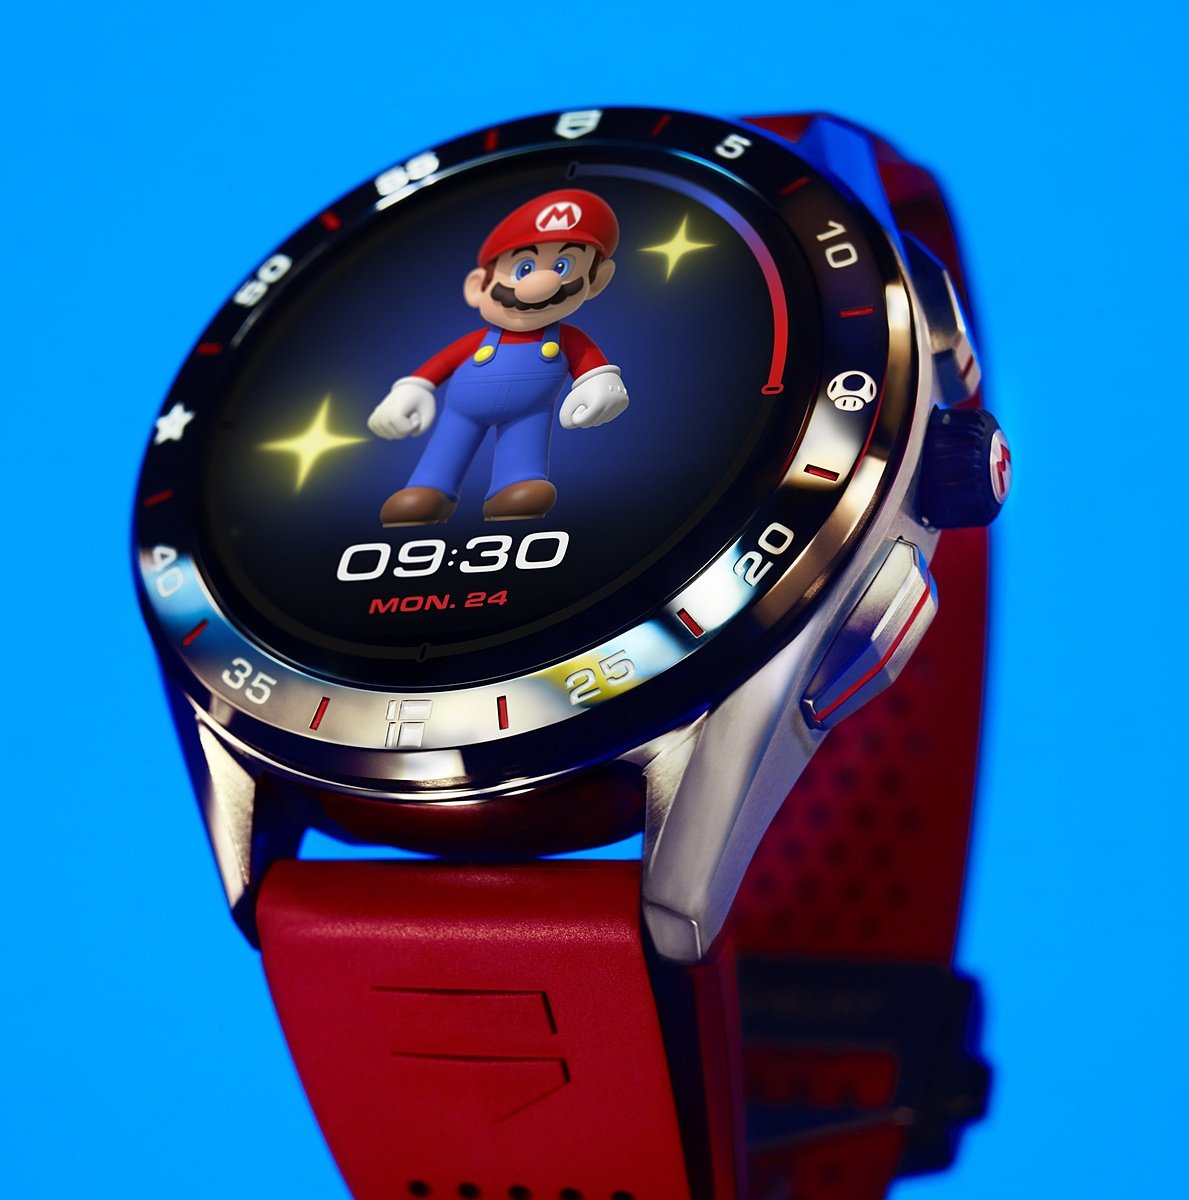 Here’s Tag Heuer’s 2,150 Super Mario watch VGC